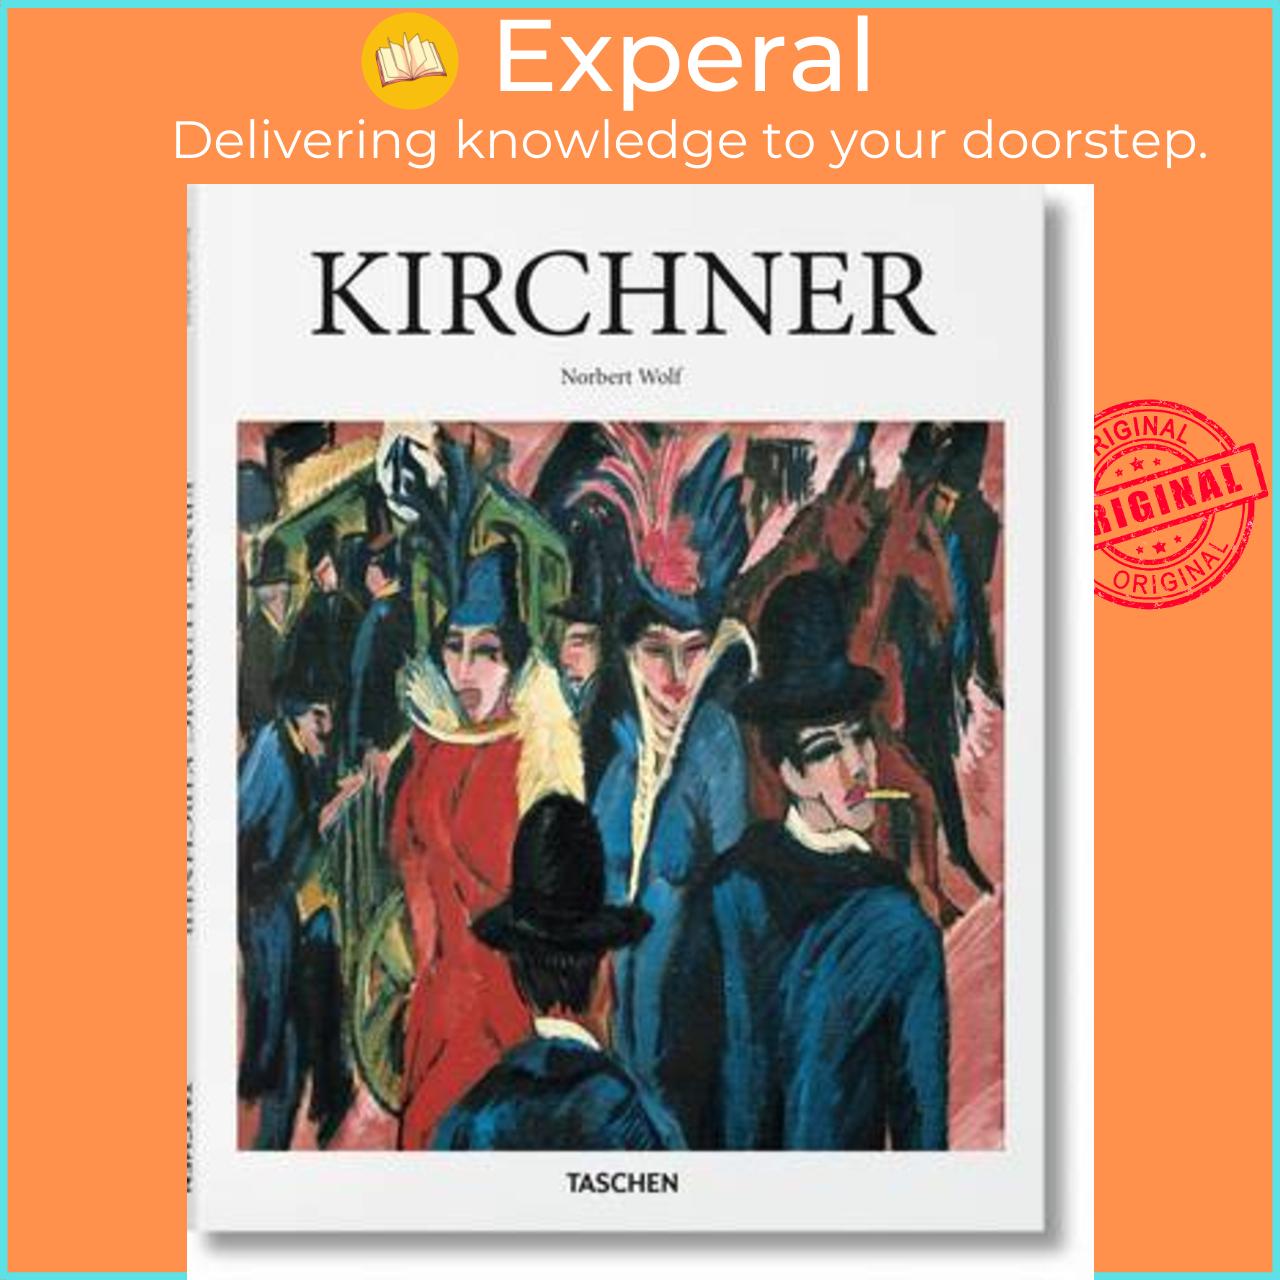 Sách - Kirchner by Norbert Wolf (hardcover)